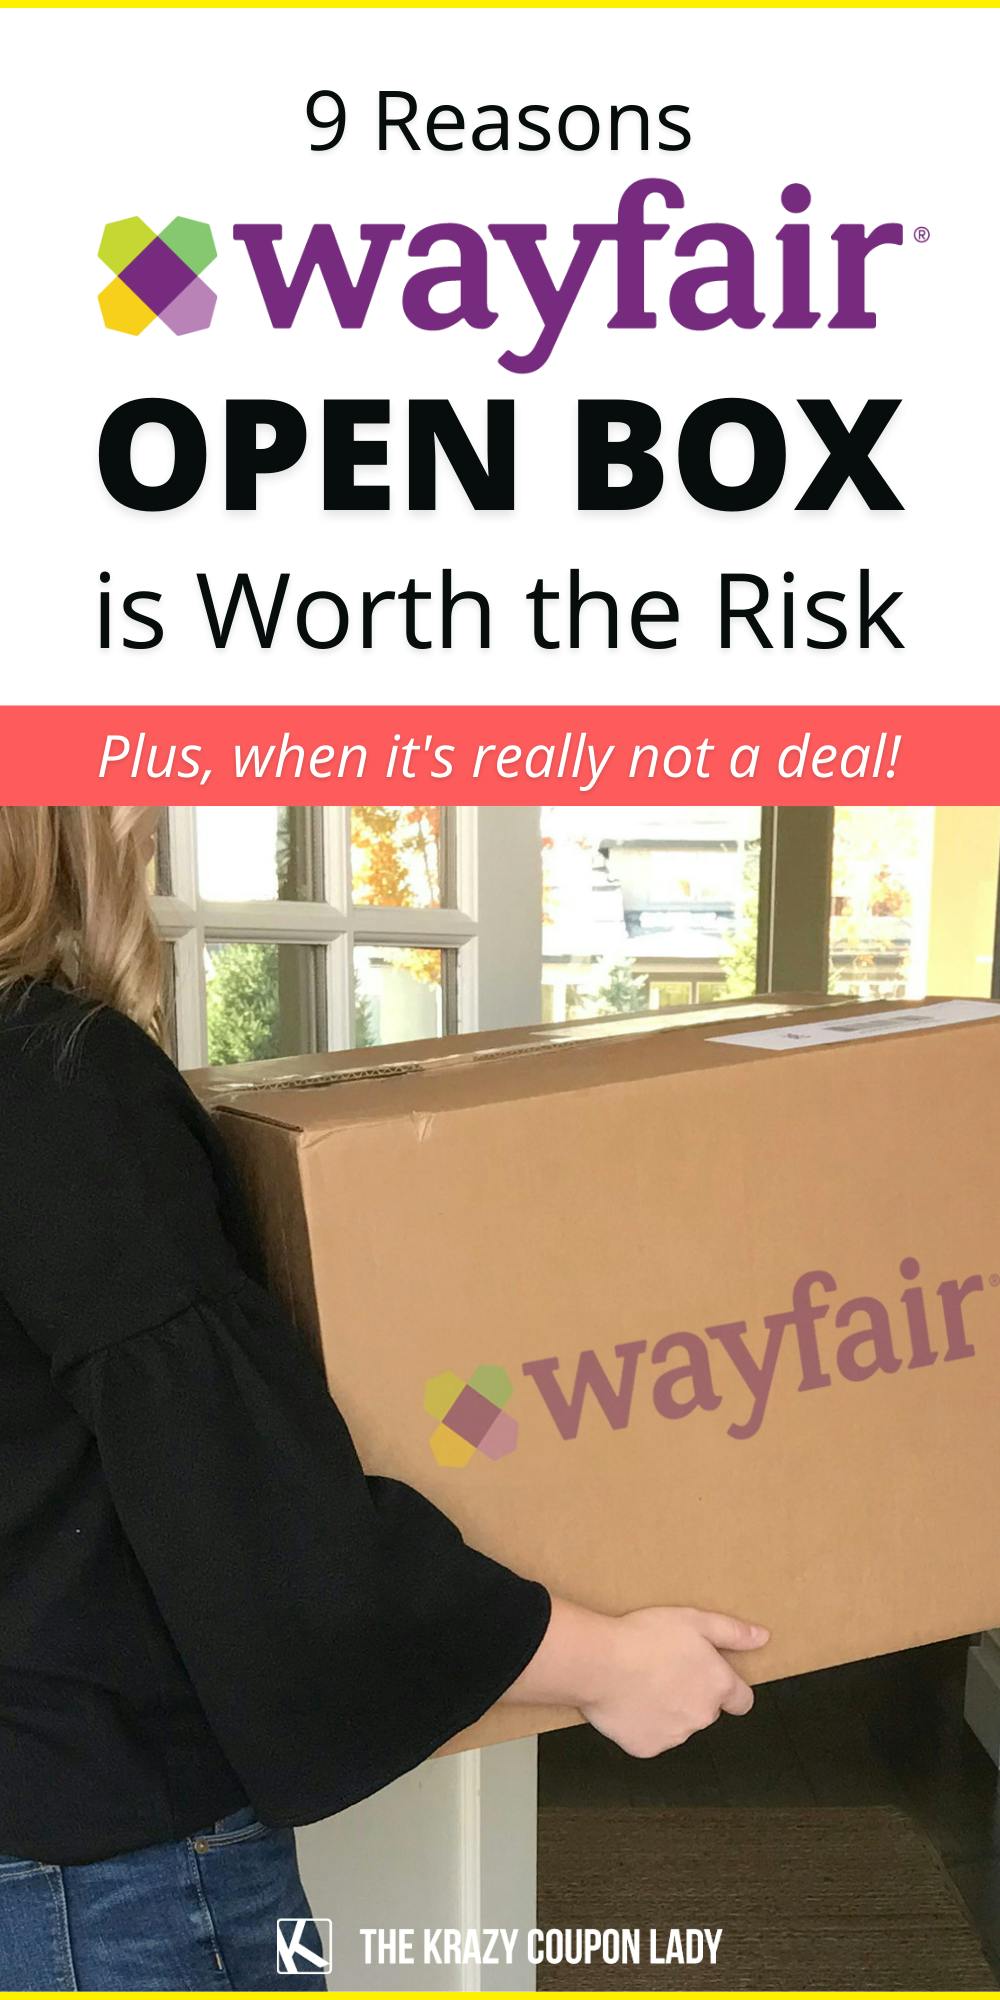 10 Things to Know About Wayfair Open Box Before You Shop